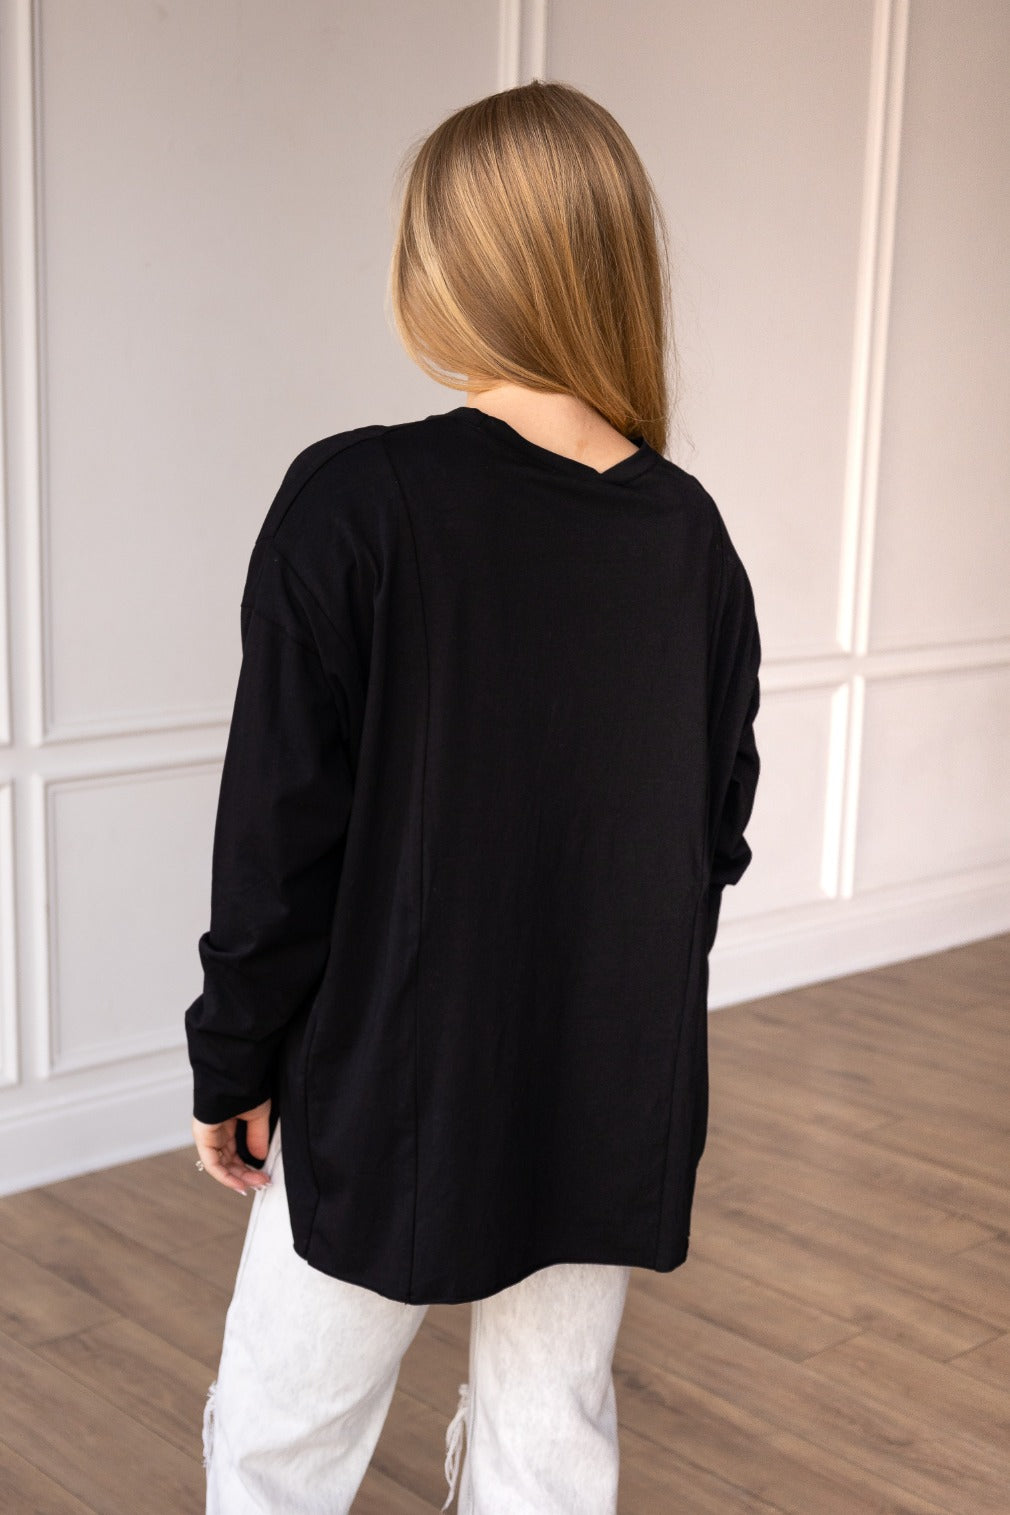 Black Long-sleeved T-shirts With Side Stitching